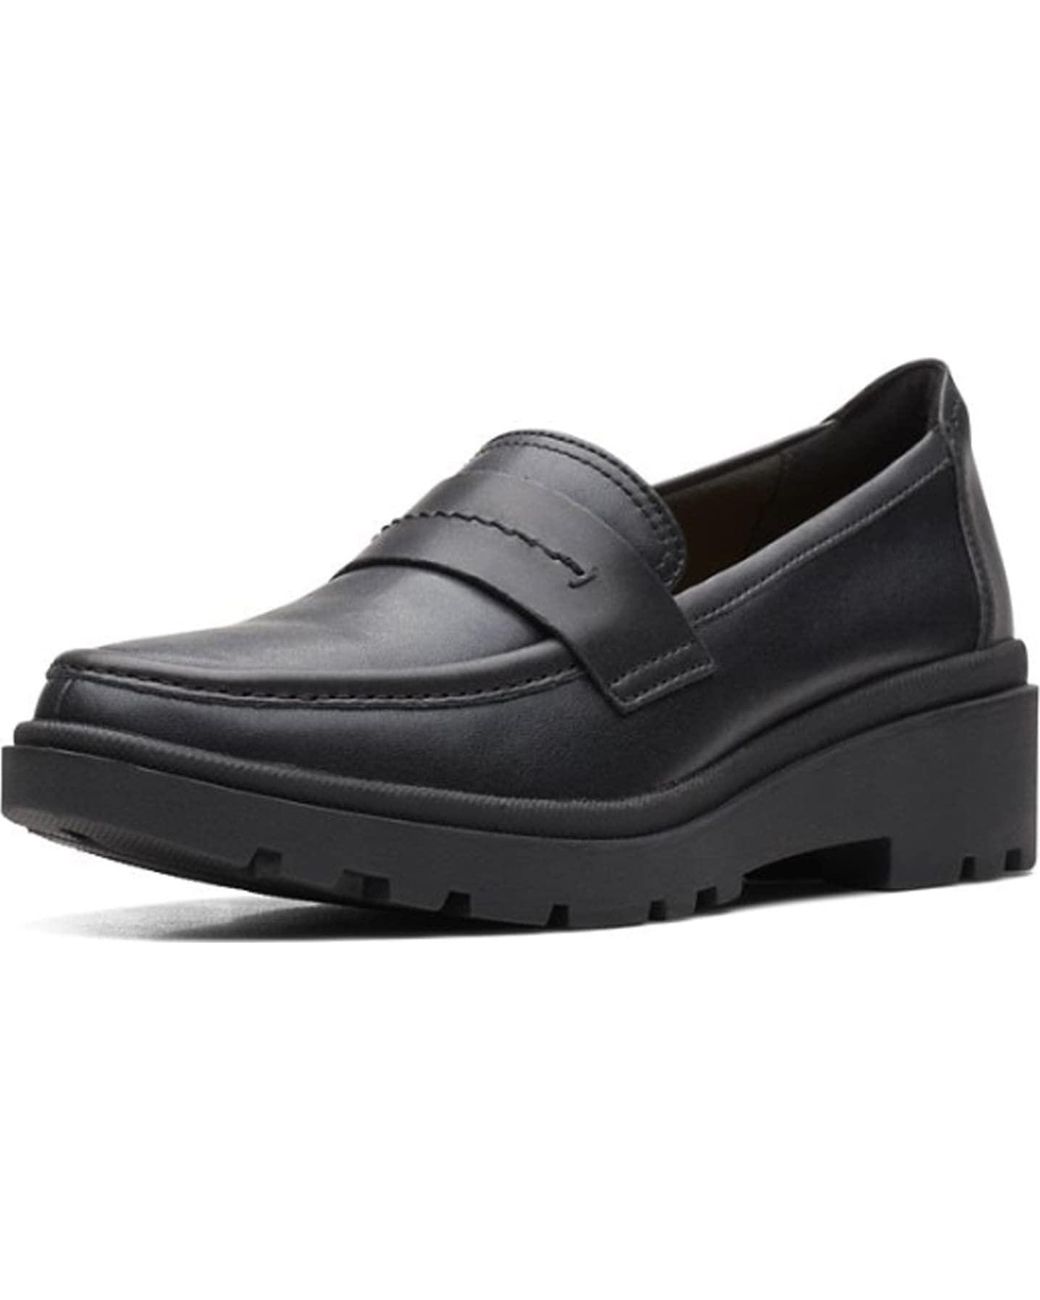 Clarks Leather Womens Calla Ease Loafer Flat in Black Leather (Black ...